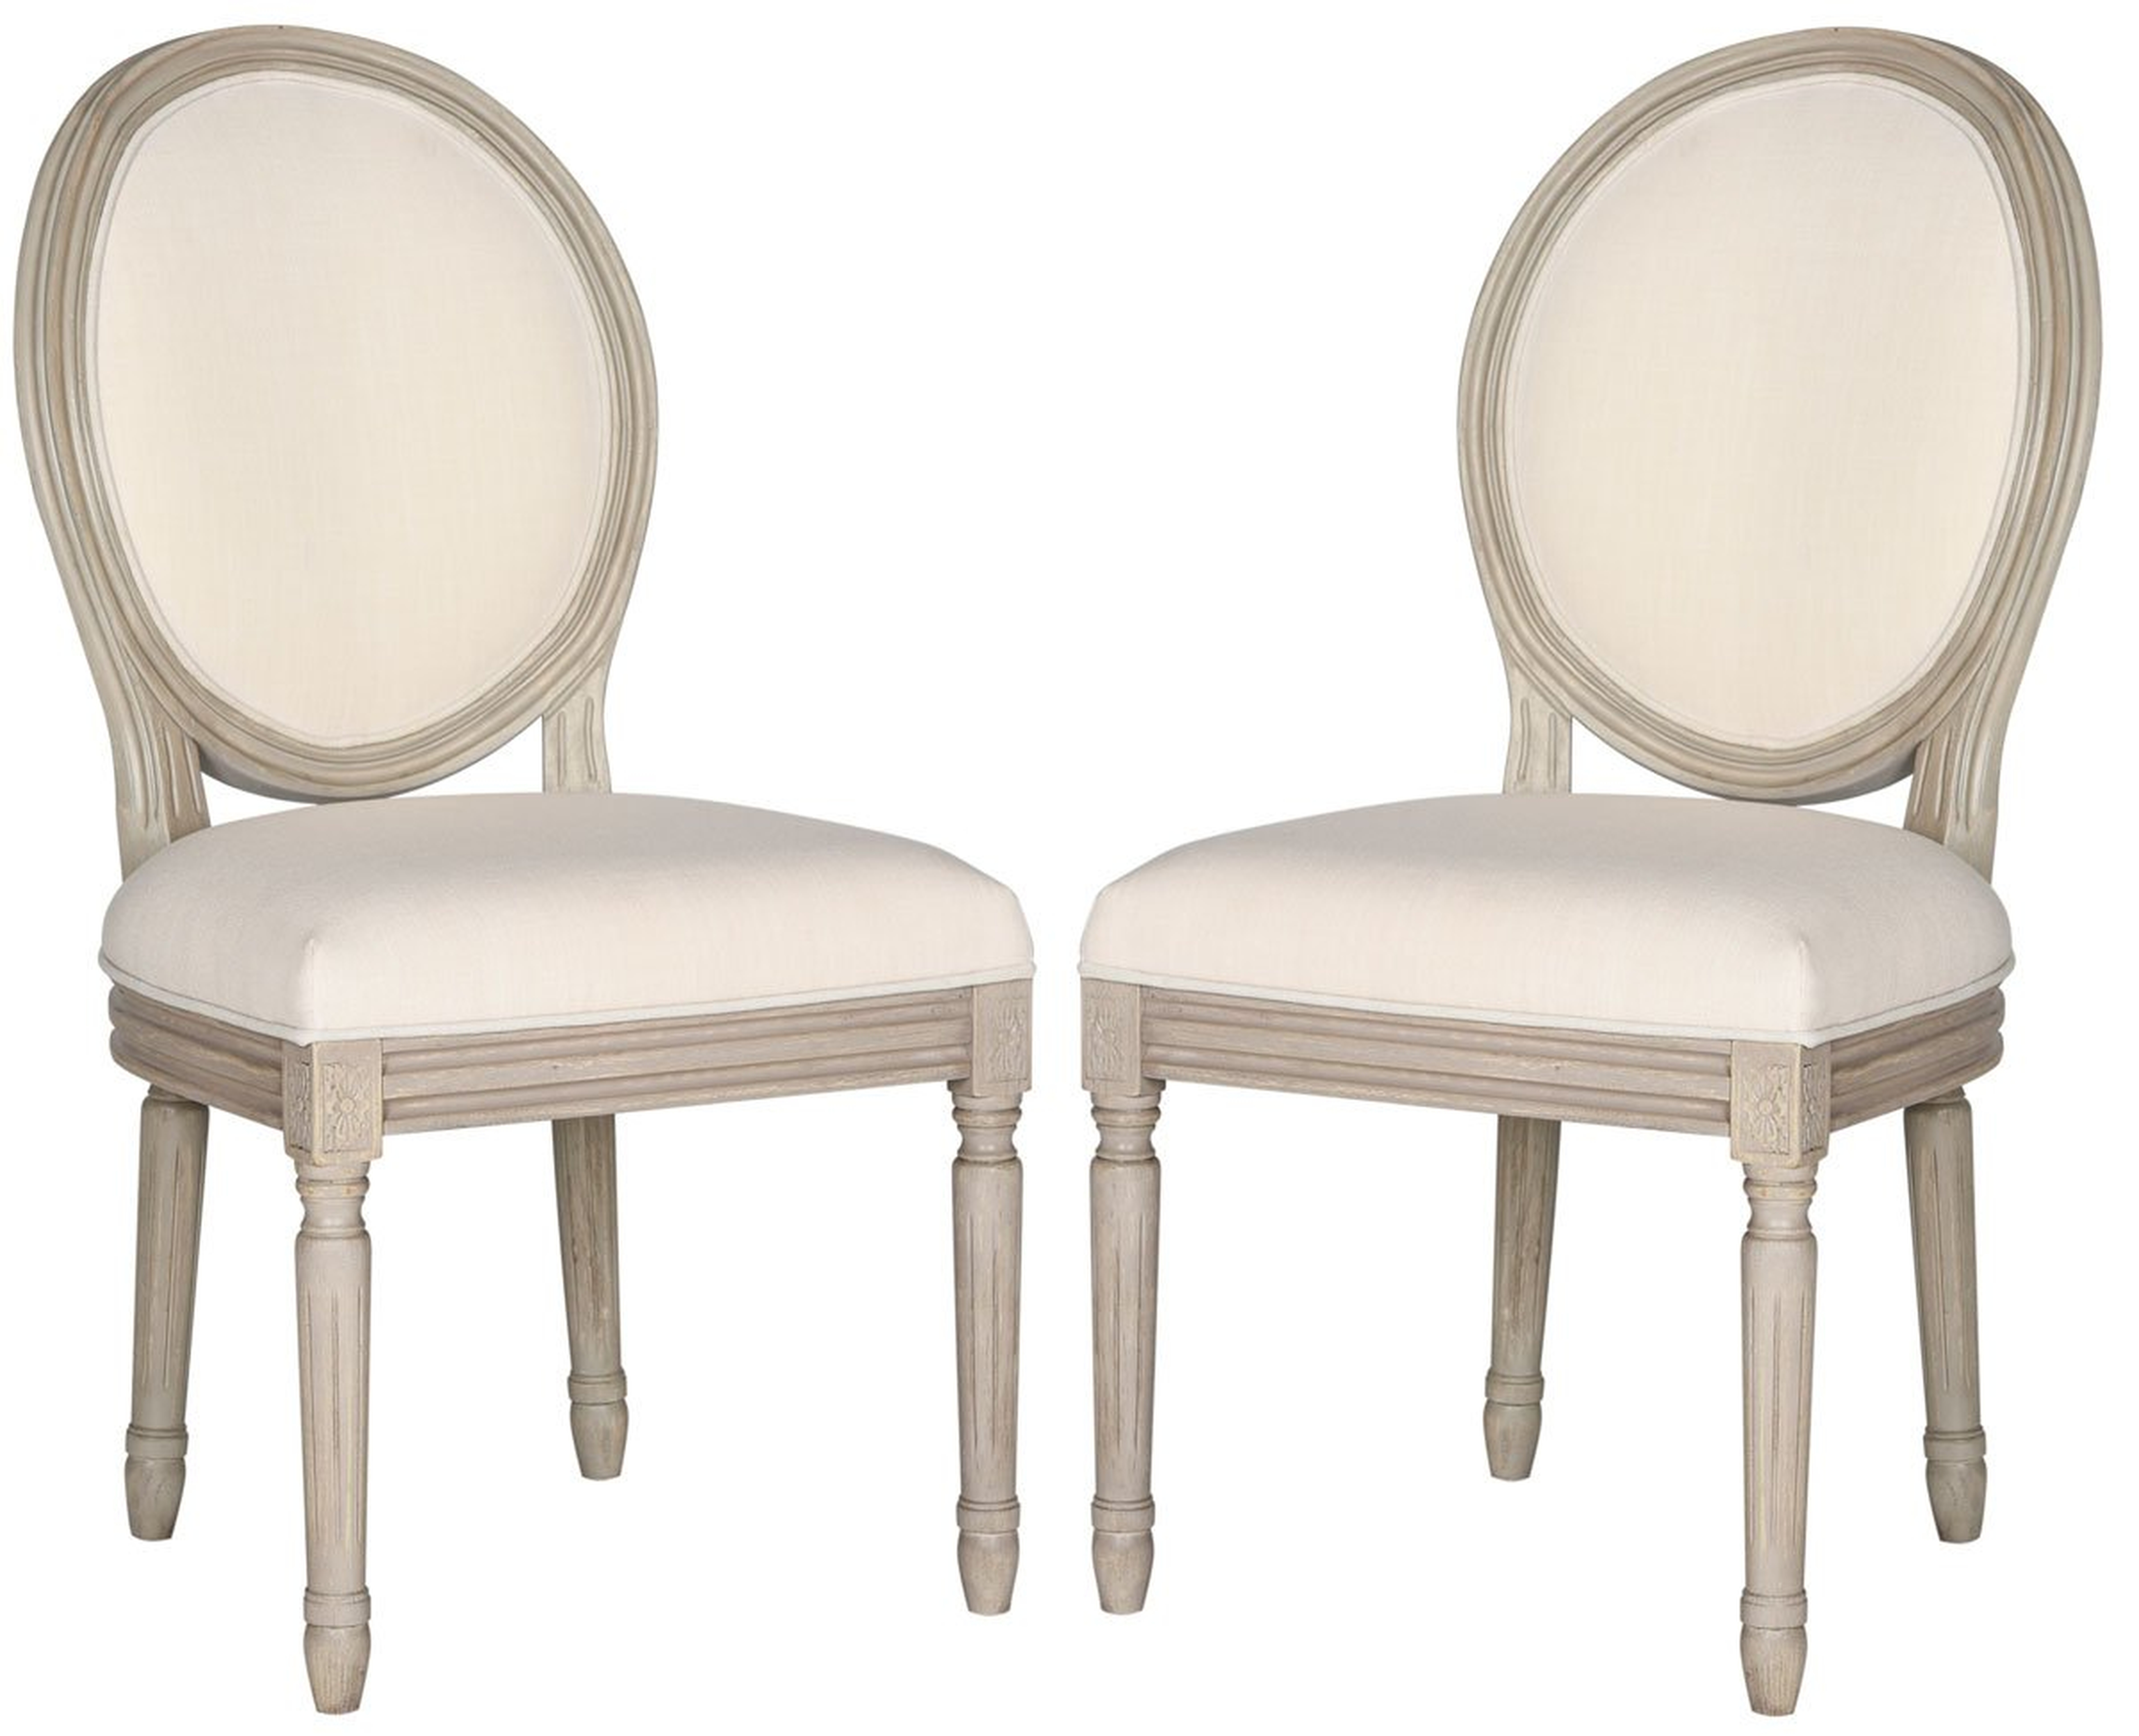 Holloway 19''H French Brasserie Linen Oval Side Chair (Set of 2) - Light Beige/Rustic Grey - Safavieh - Arlo Home